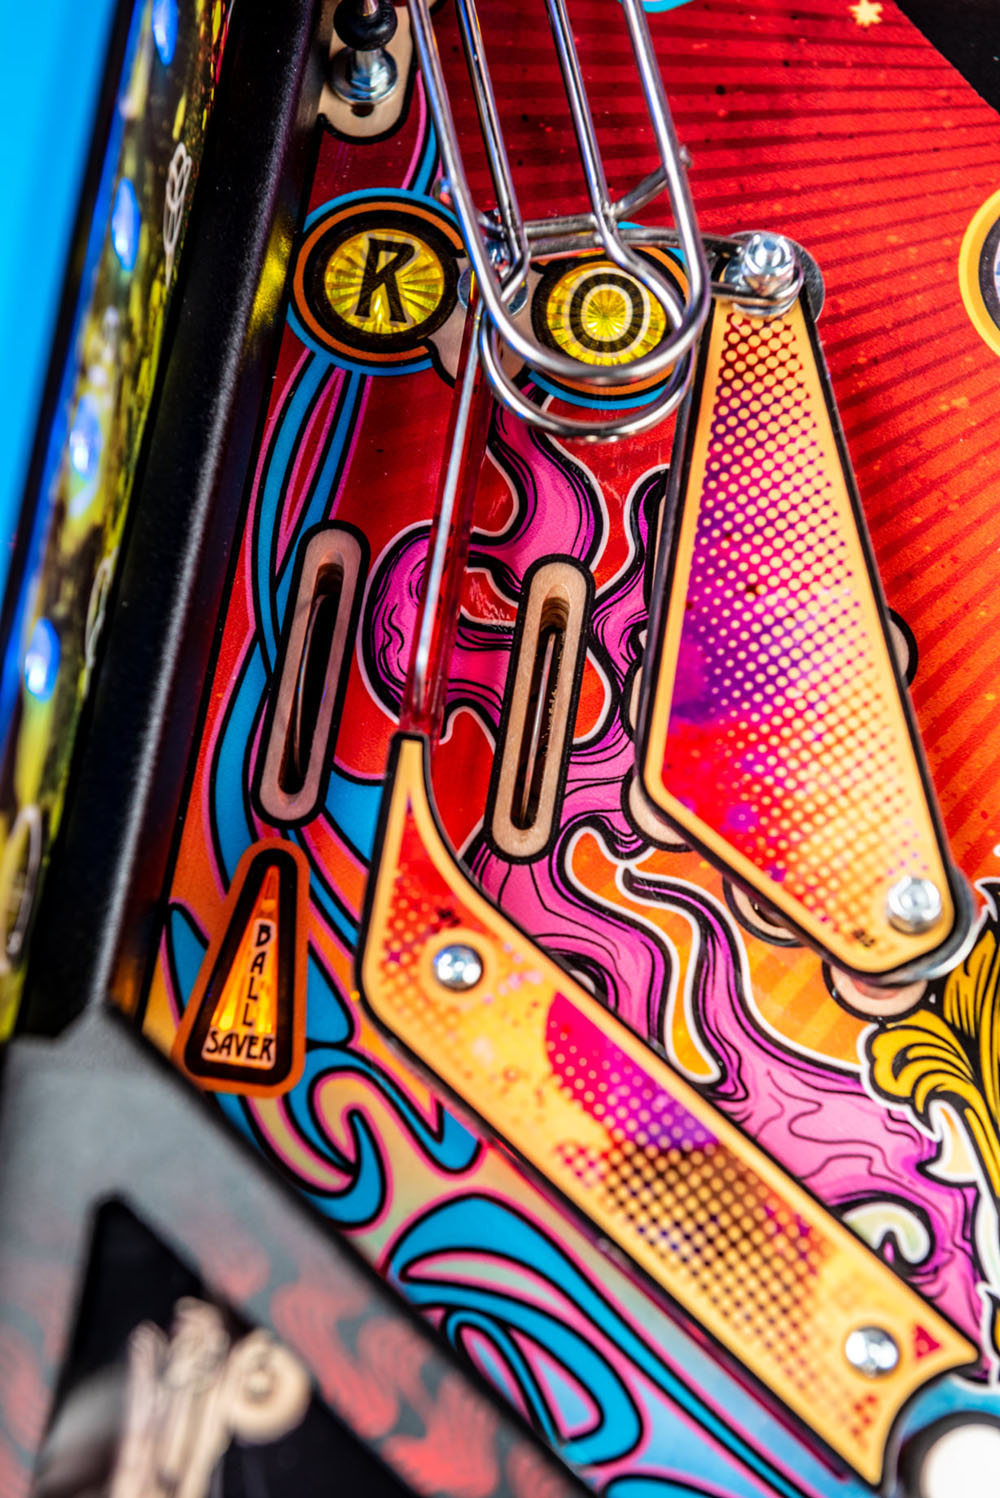 Led Zeppelin Pinball Machine - LE Version by STERN Pinball For Sale UK.